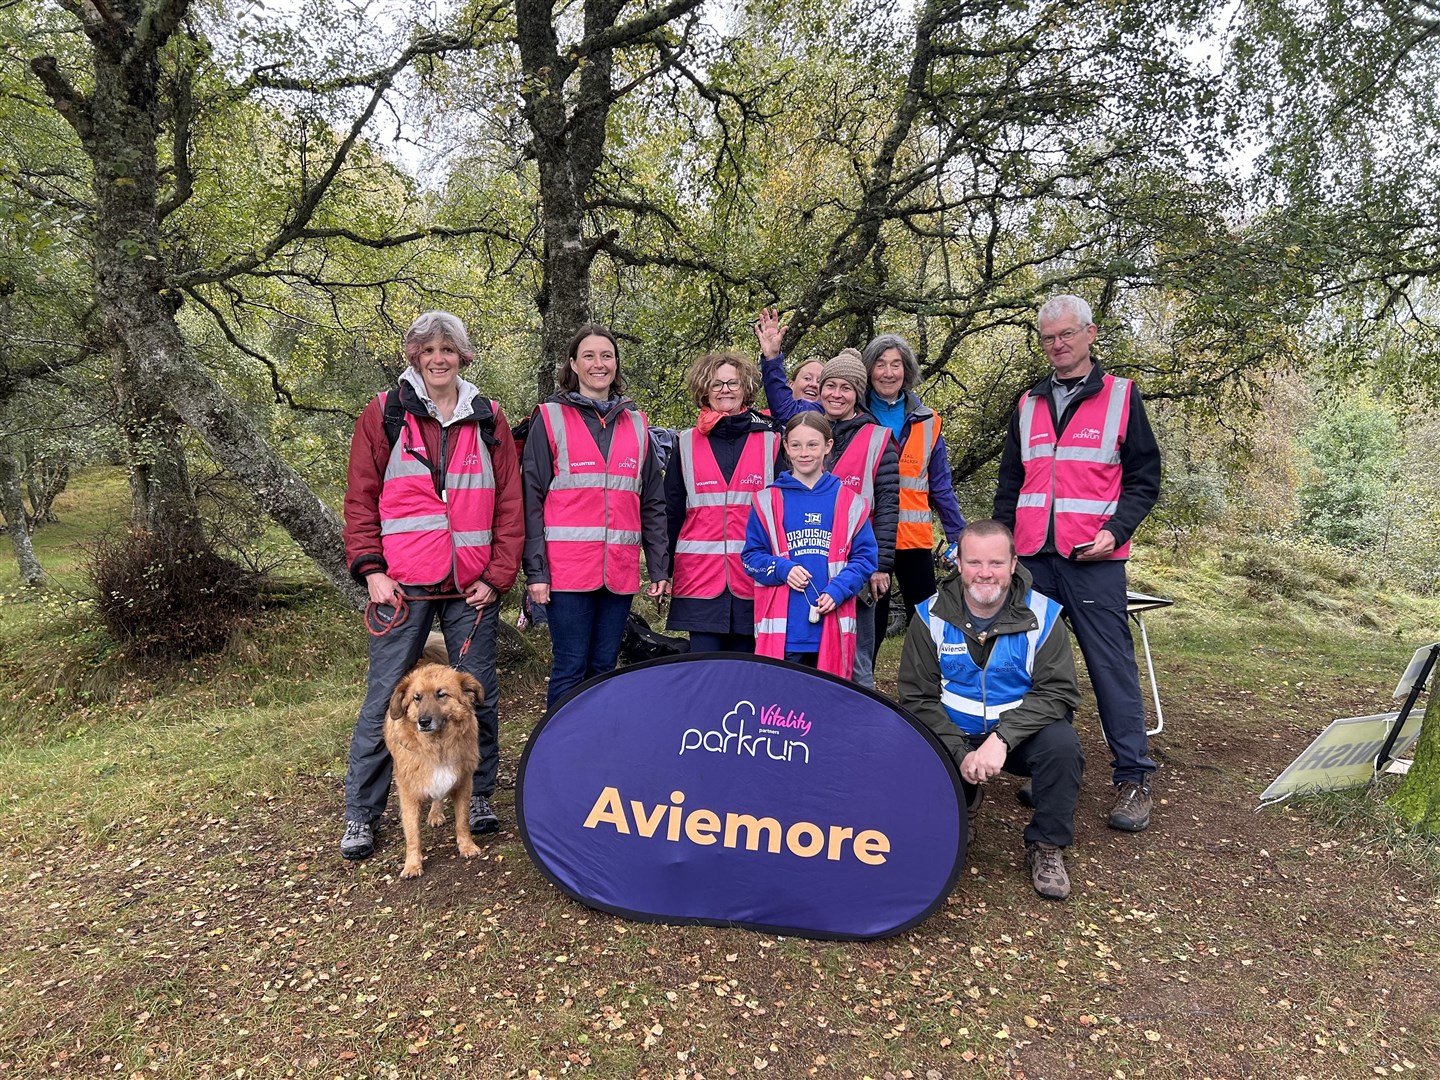 Great job: the sturdy volunteers at Saturday's Parkrun in Aviemore, from left Alice Bailey, Beccy Stanton, Jenny Little, Vickie Rampton, Eilidh Murdoch, Hilary Quick, Pete Wright and Stephen Bingham.